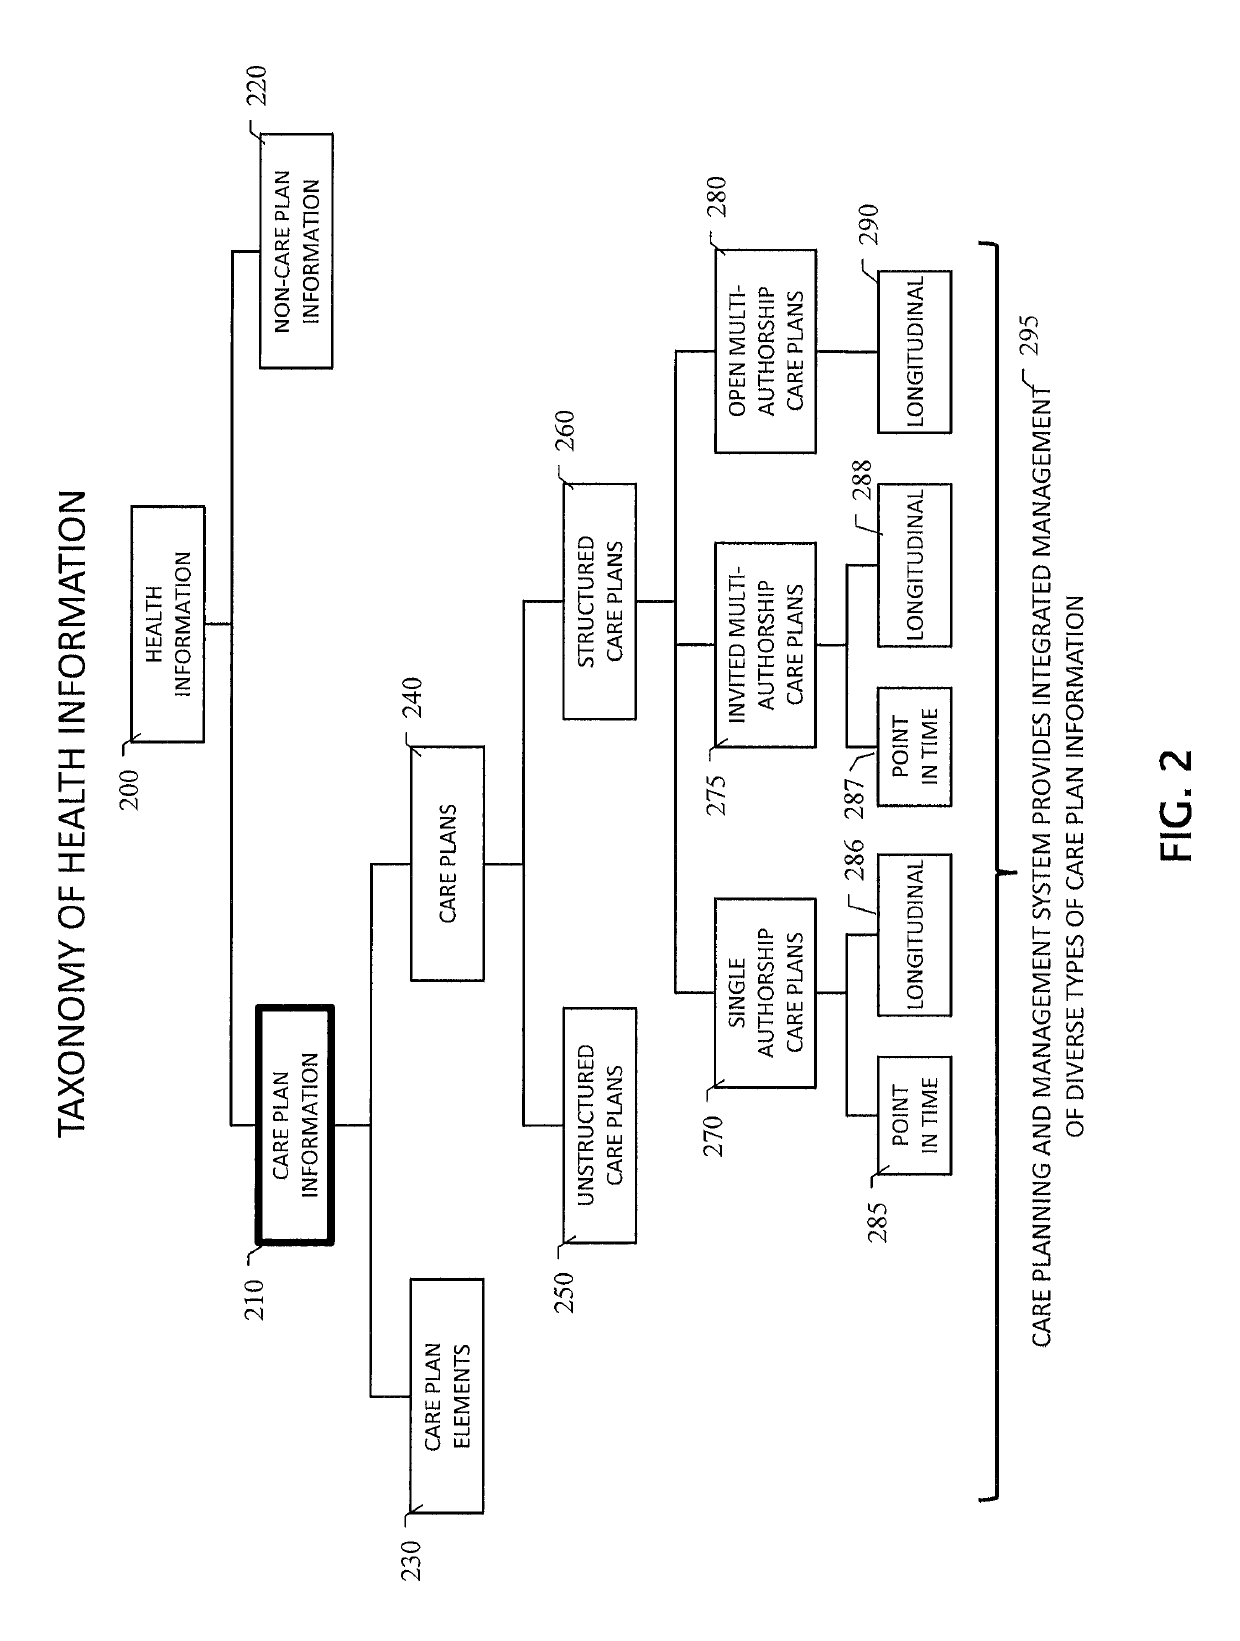 Longitudinal multi-author care planning and management system with user-tailored care plan hierarchy that propagates based on care responsibility information